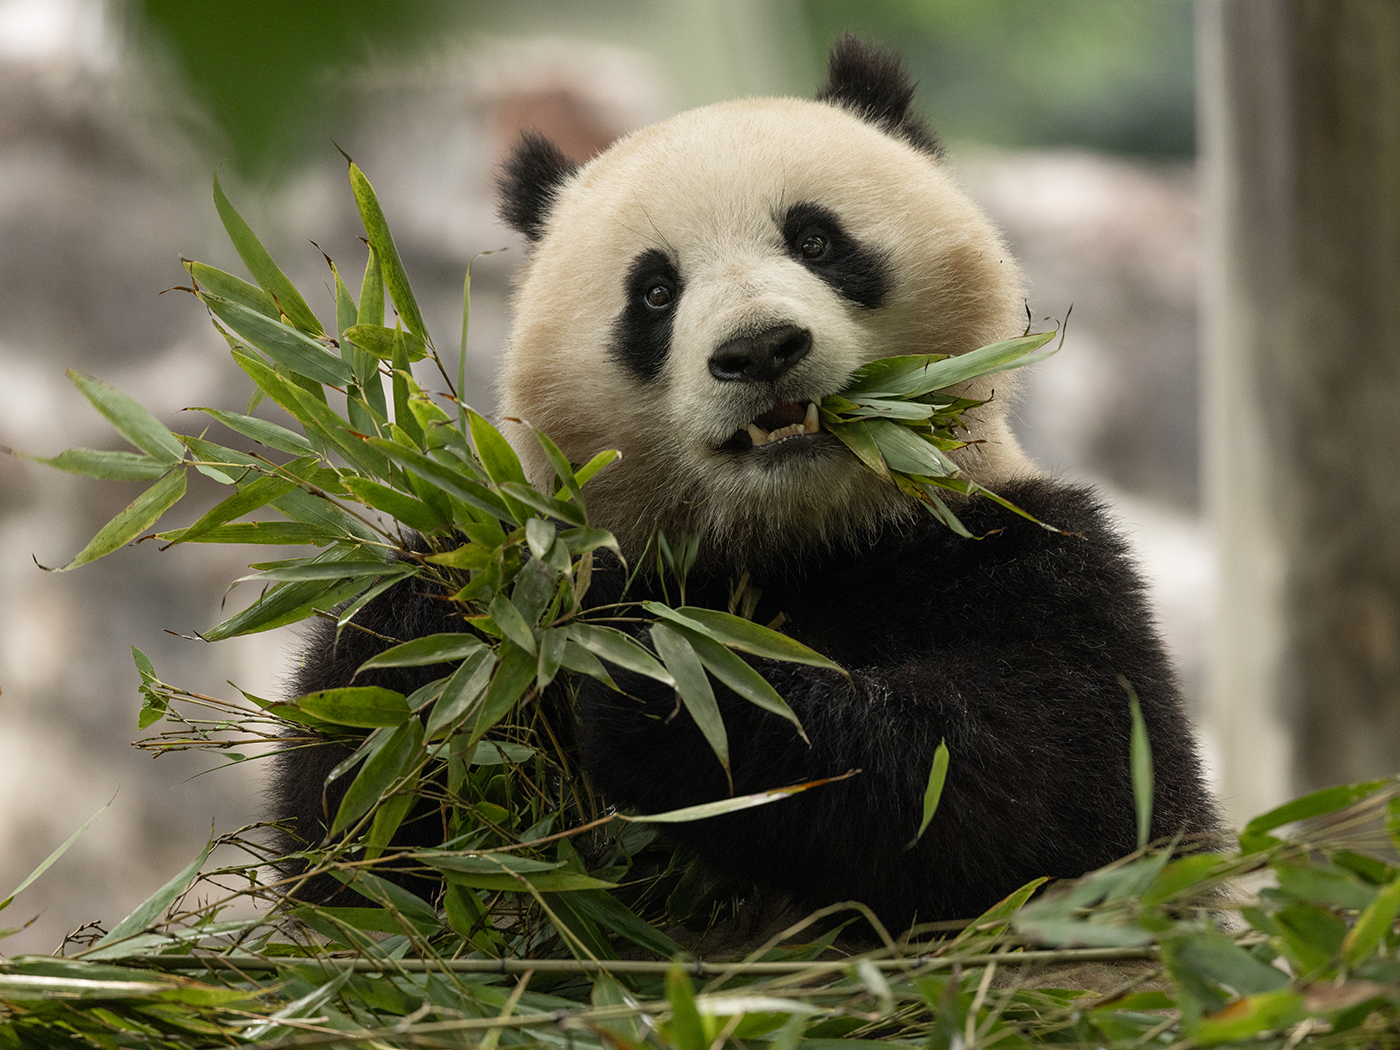 A female panda munches on a massive pile of bamboo.